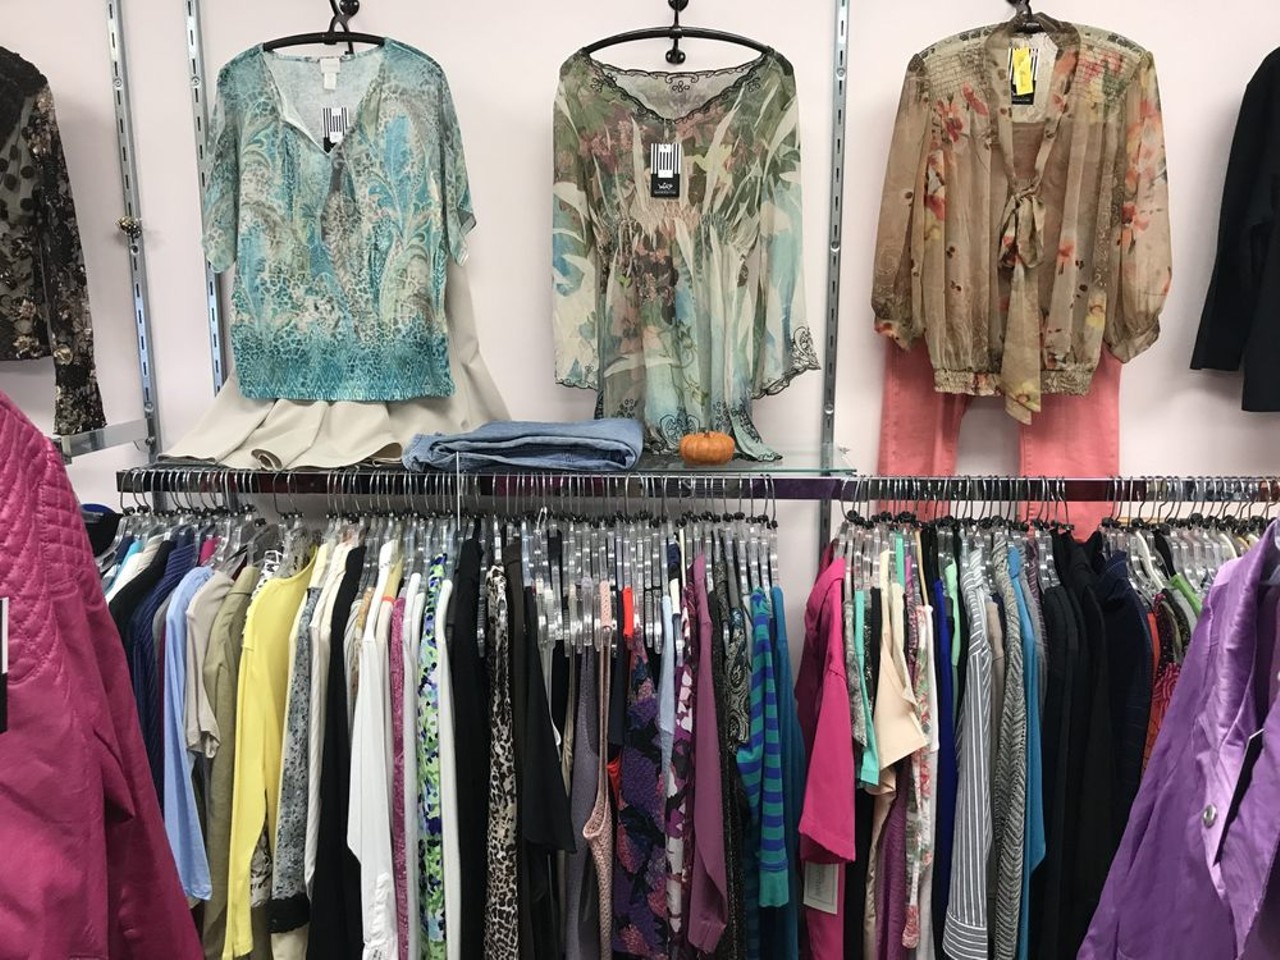  Whoo Upscale Resale For a Cause 
119 S Main St., Rochester; 248-656-9946 
Talk about fashion with a mission! Whoo Upscale Resale aids families who have suffered financial hardships due to illness.
Photo via  Yelp, Antonio L. 